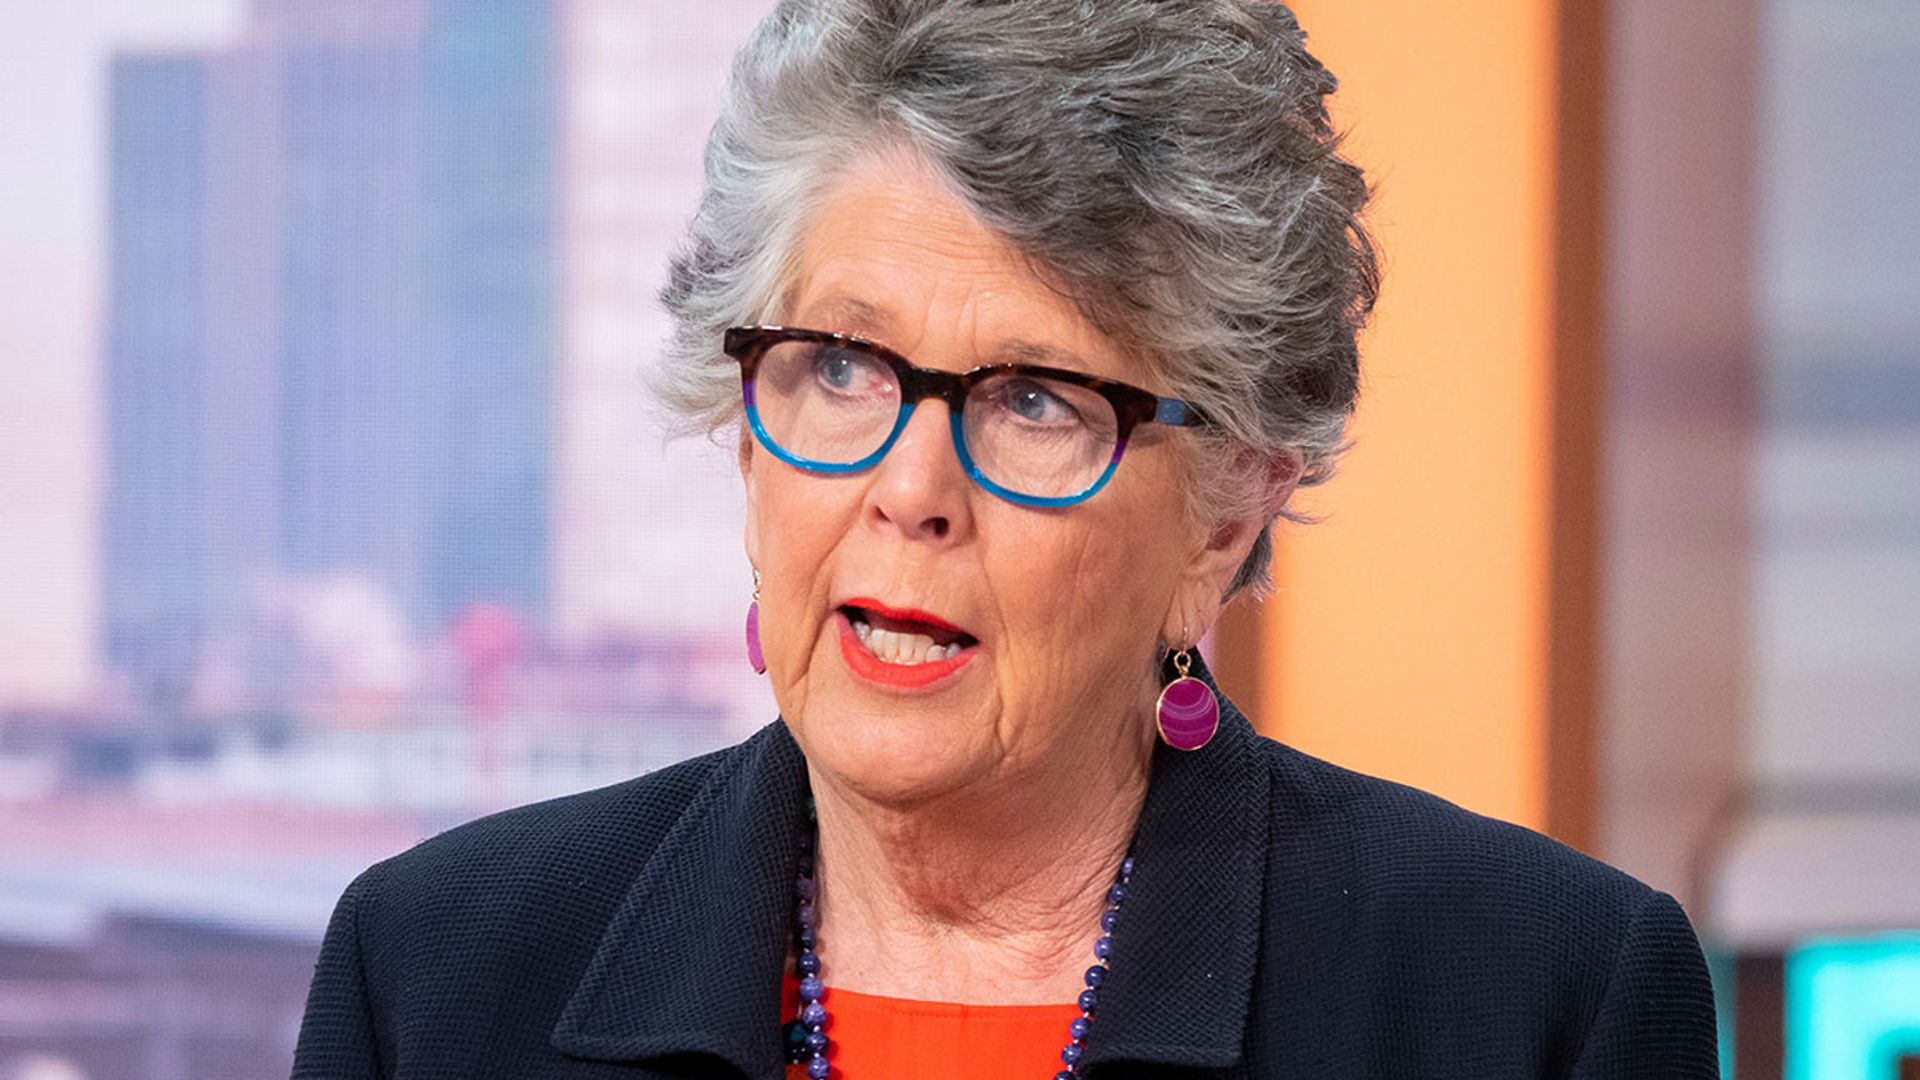 Prue Leith breaks silence on her controversial calorie comments on The Great British Bake Off